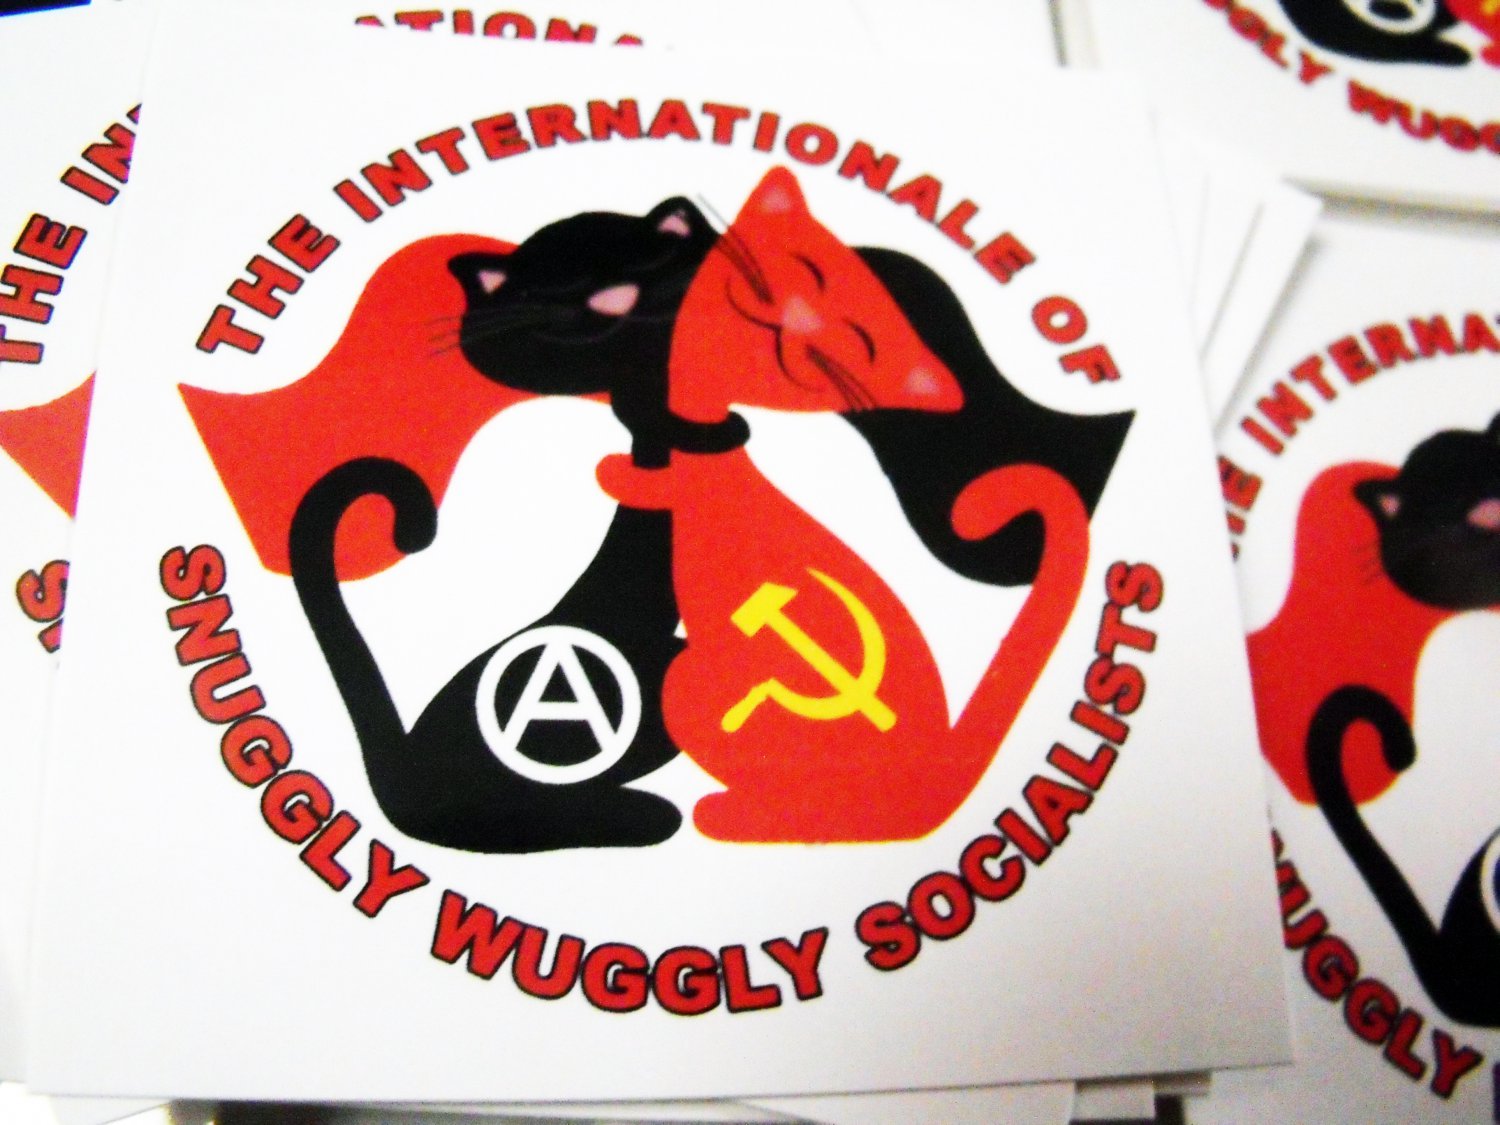 100 THE INTERNATIoNALE oF SNUGGLY WUGGLY SoCIALISTS 2.5" x 2.5" stickers